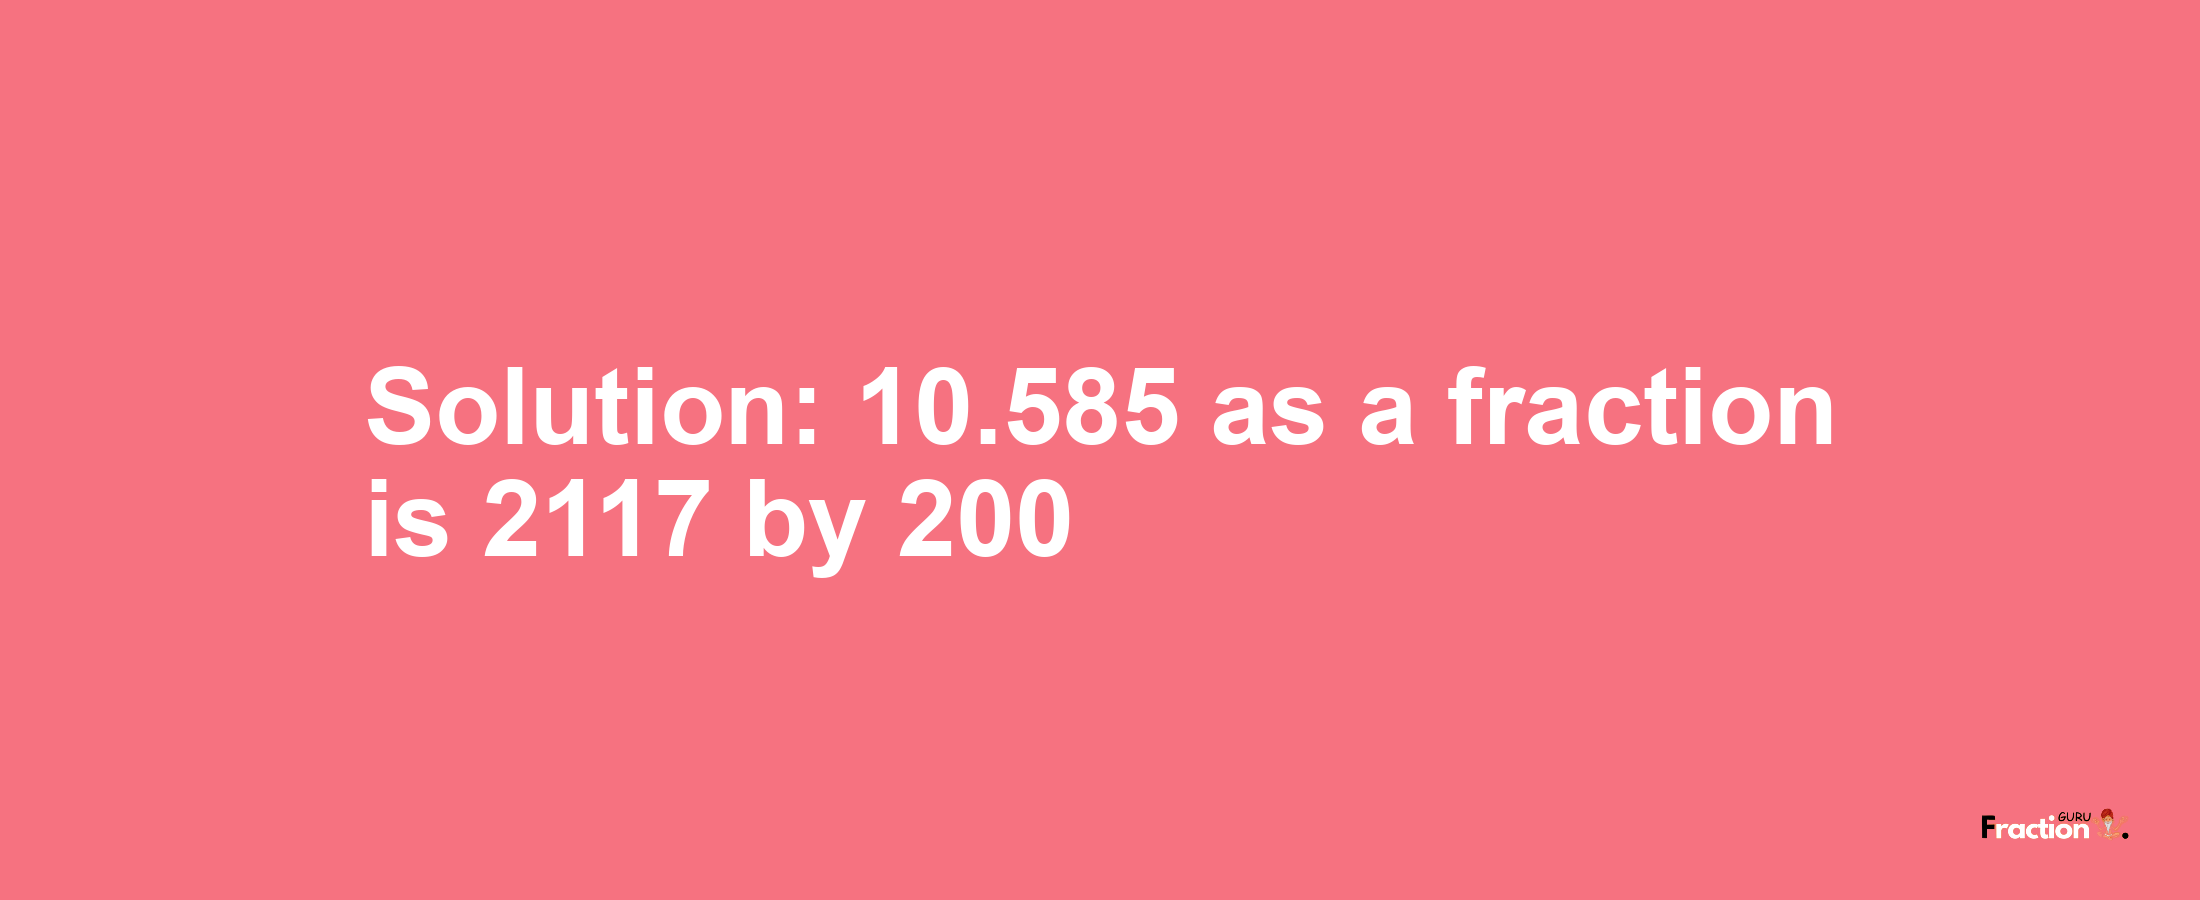 Solution:10.585 as a fraction is 2117/200